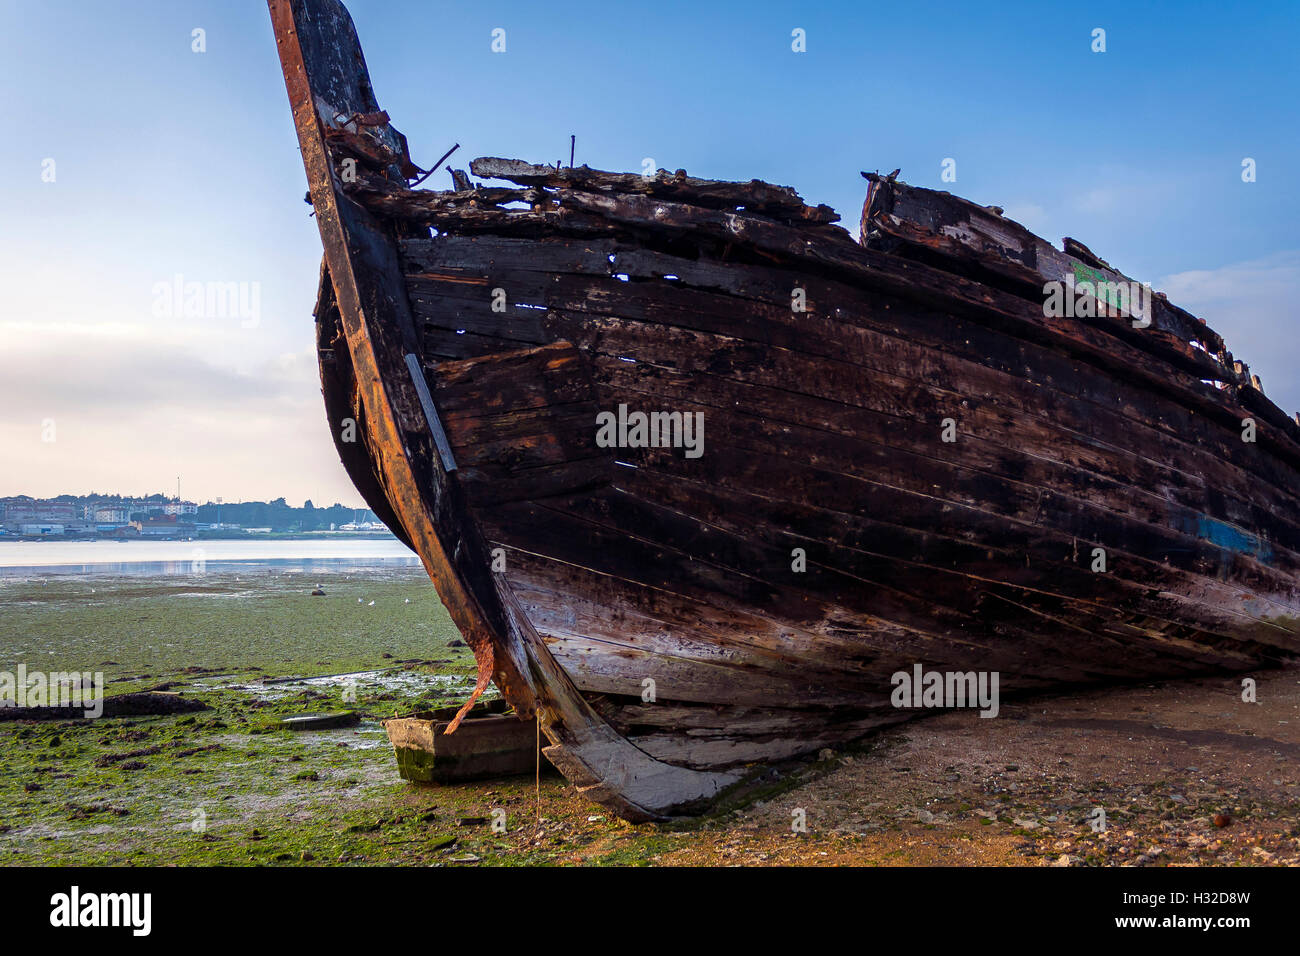 Old wood boat on the beach Stock Photo